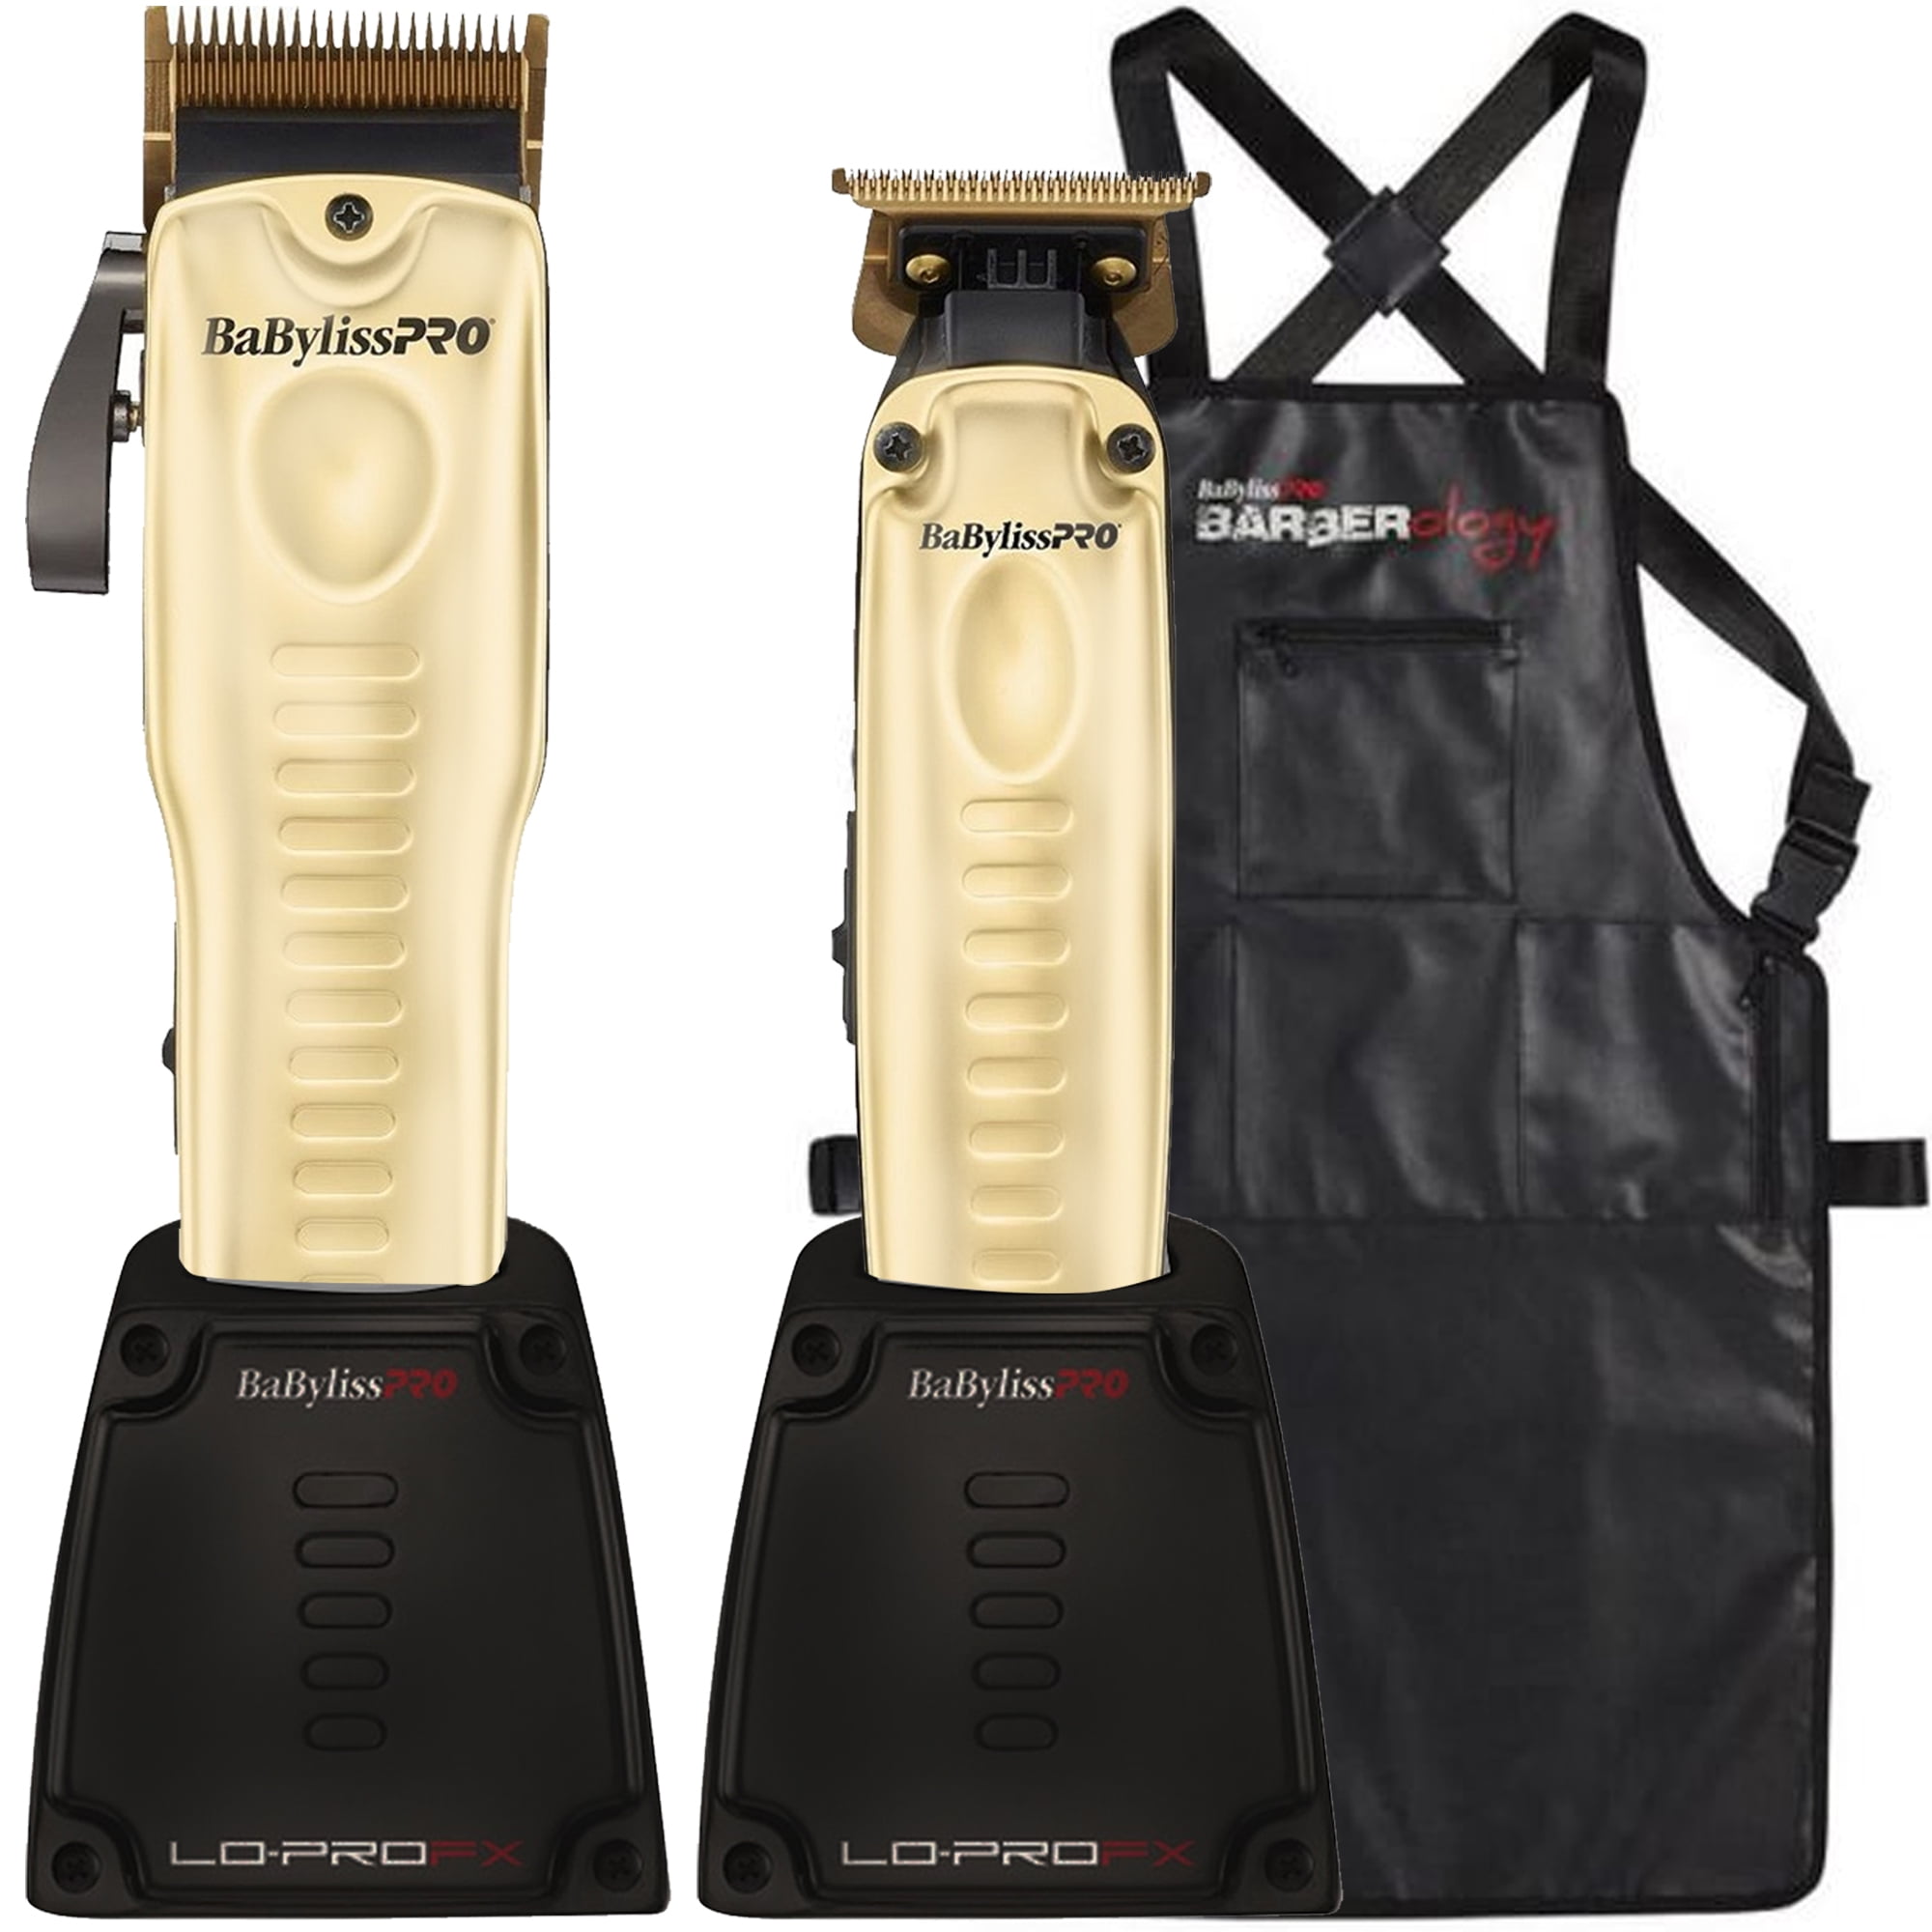 Babyliss LO-PROFX Limited Edition Clipper & Trimmer Combo Gold